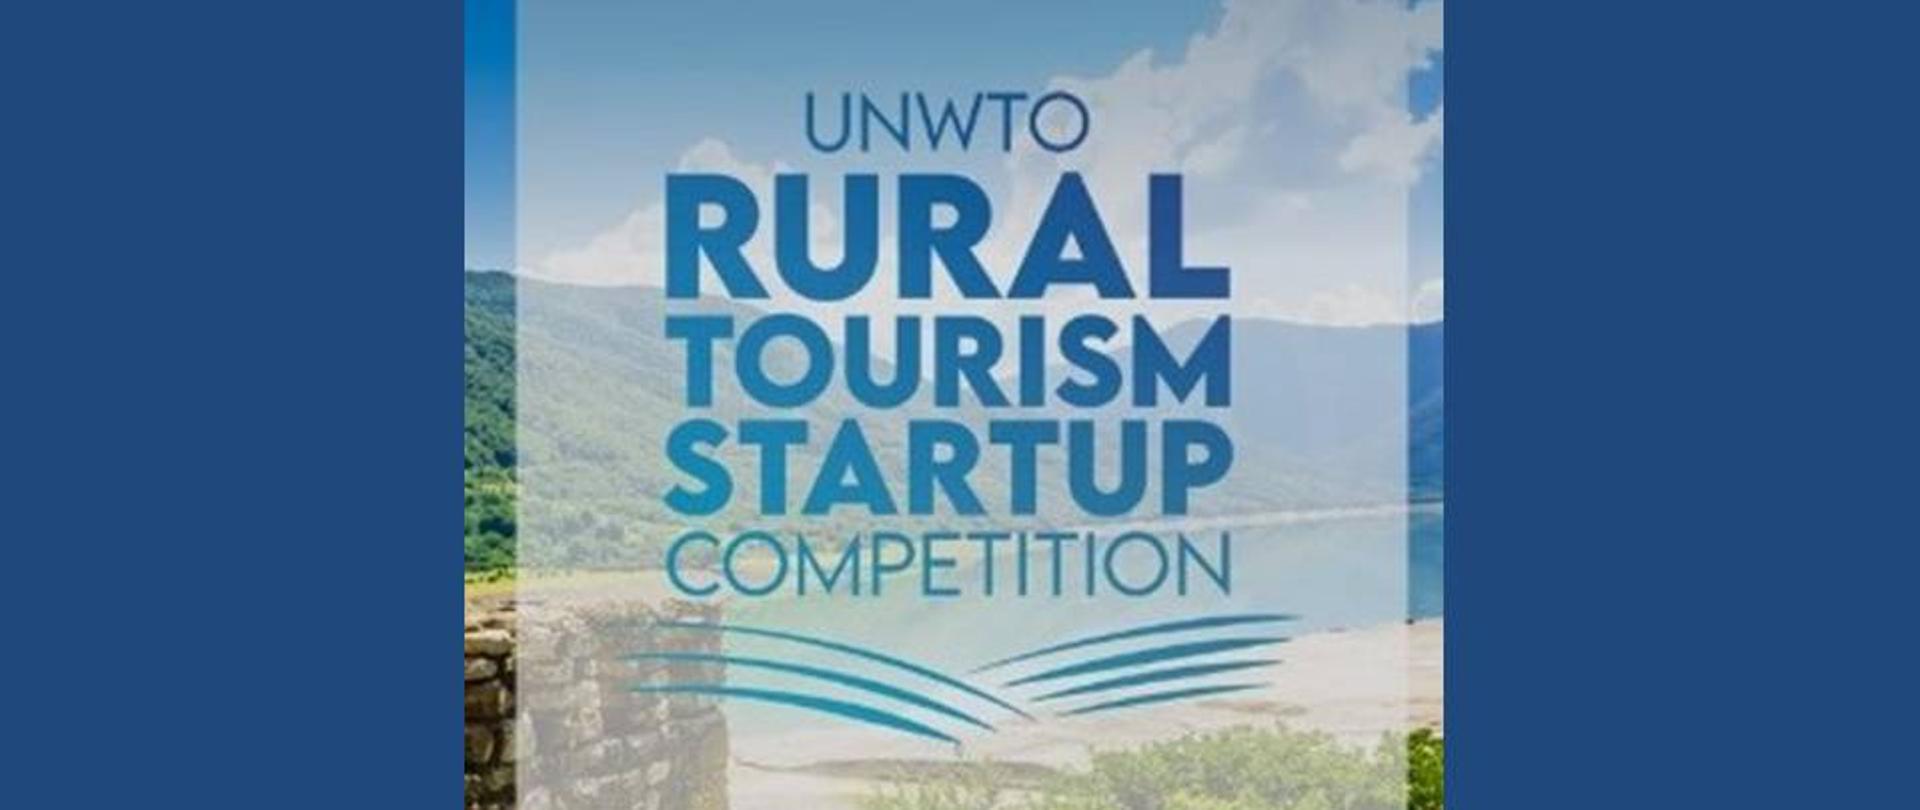 UNWTO Rural Tourism Start-up Competition